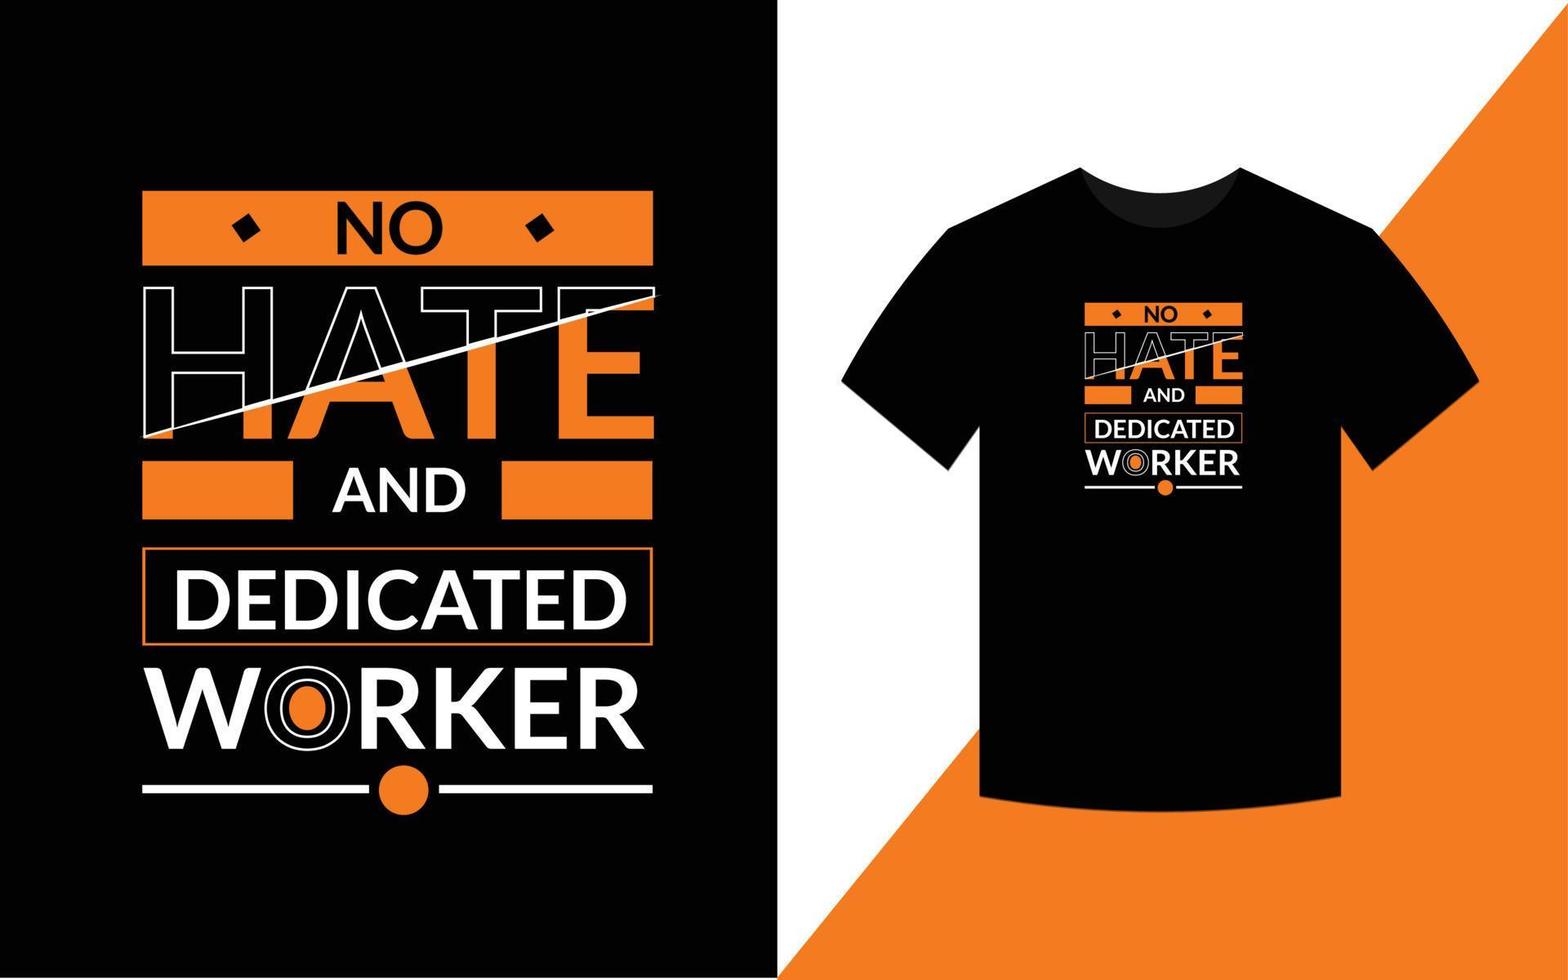 No hate and dedicated worker modern motivational quotes t shirt design template vector